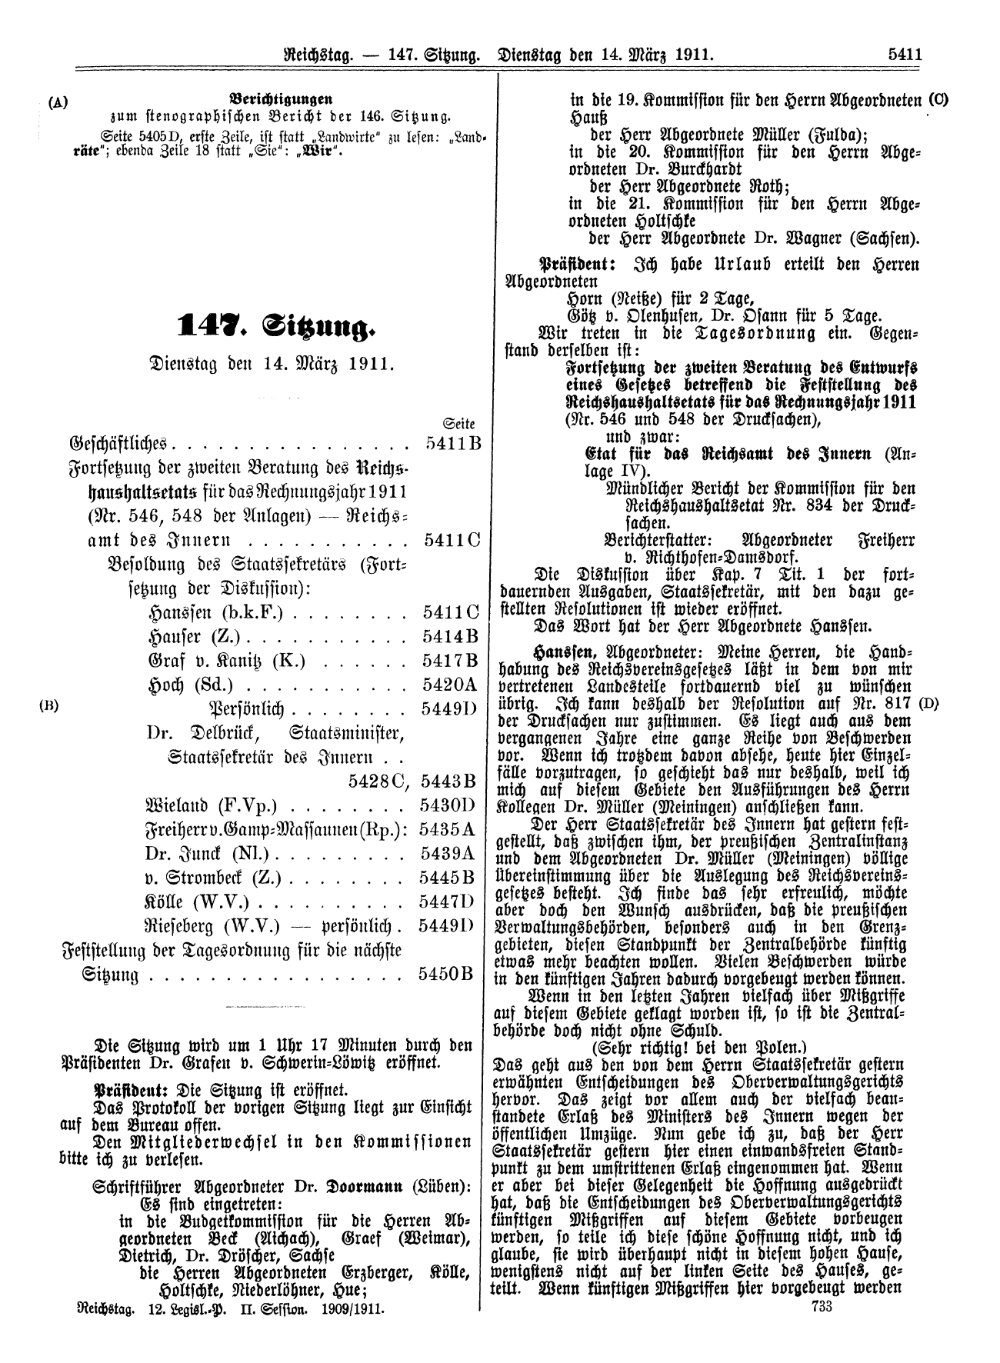 Scan of page 5411